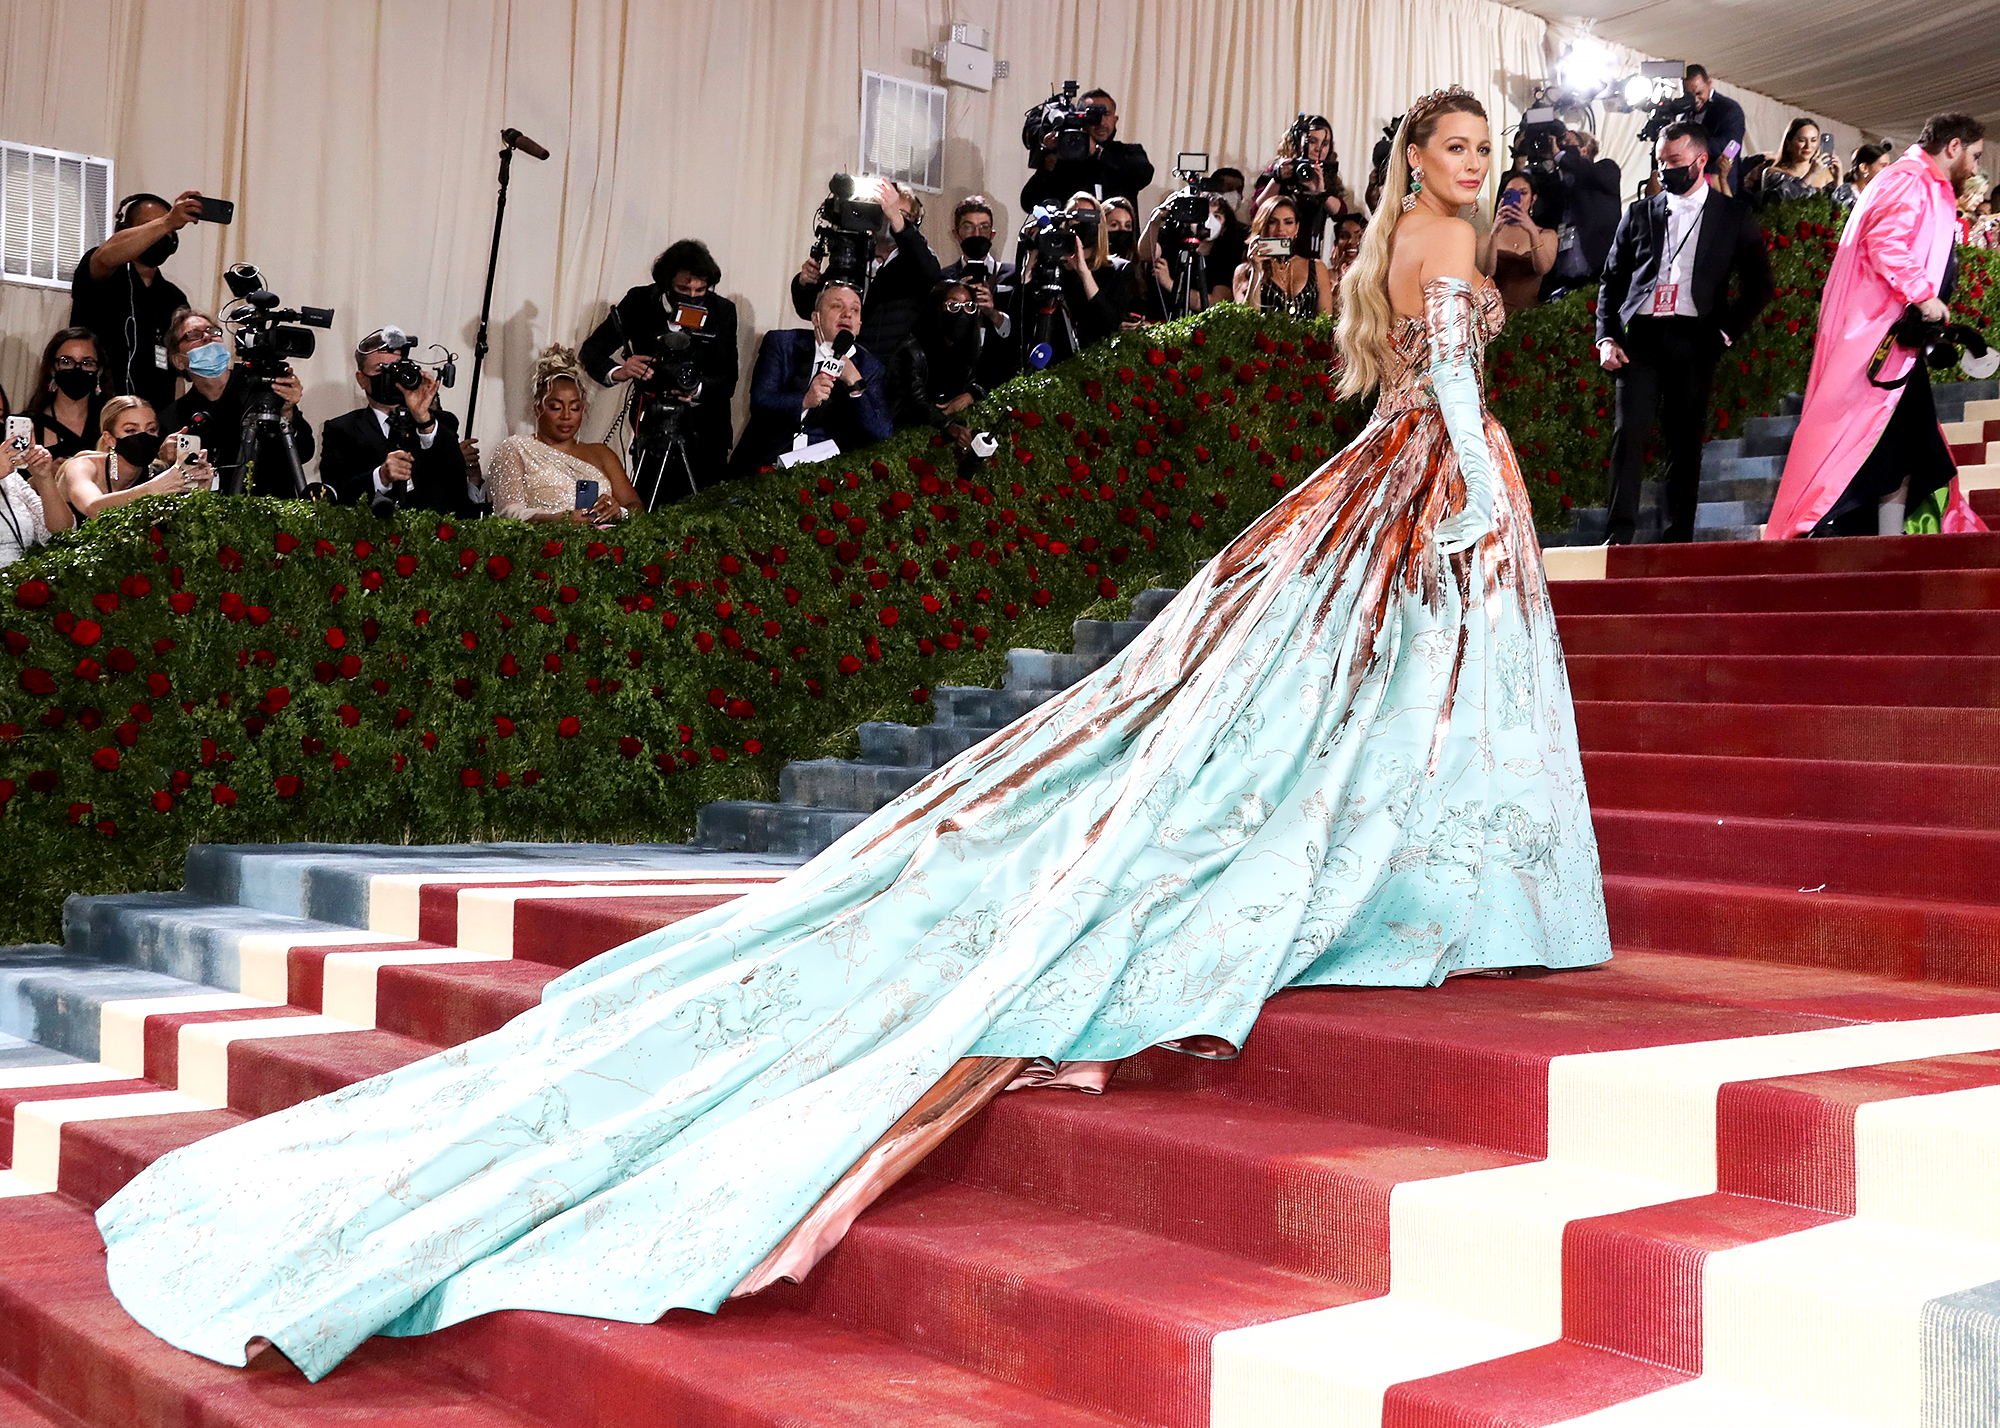 Blake Lively ‘Hops’ Over an Exhibit Rope to Fix Her Iconic Met Gala Dress